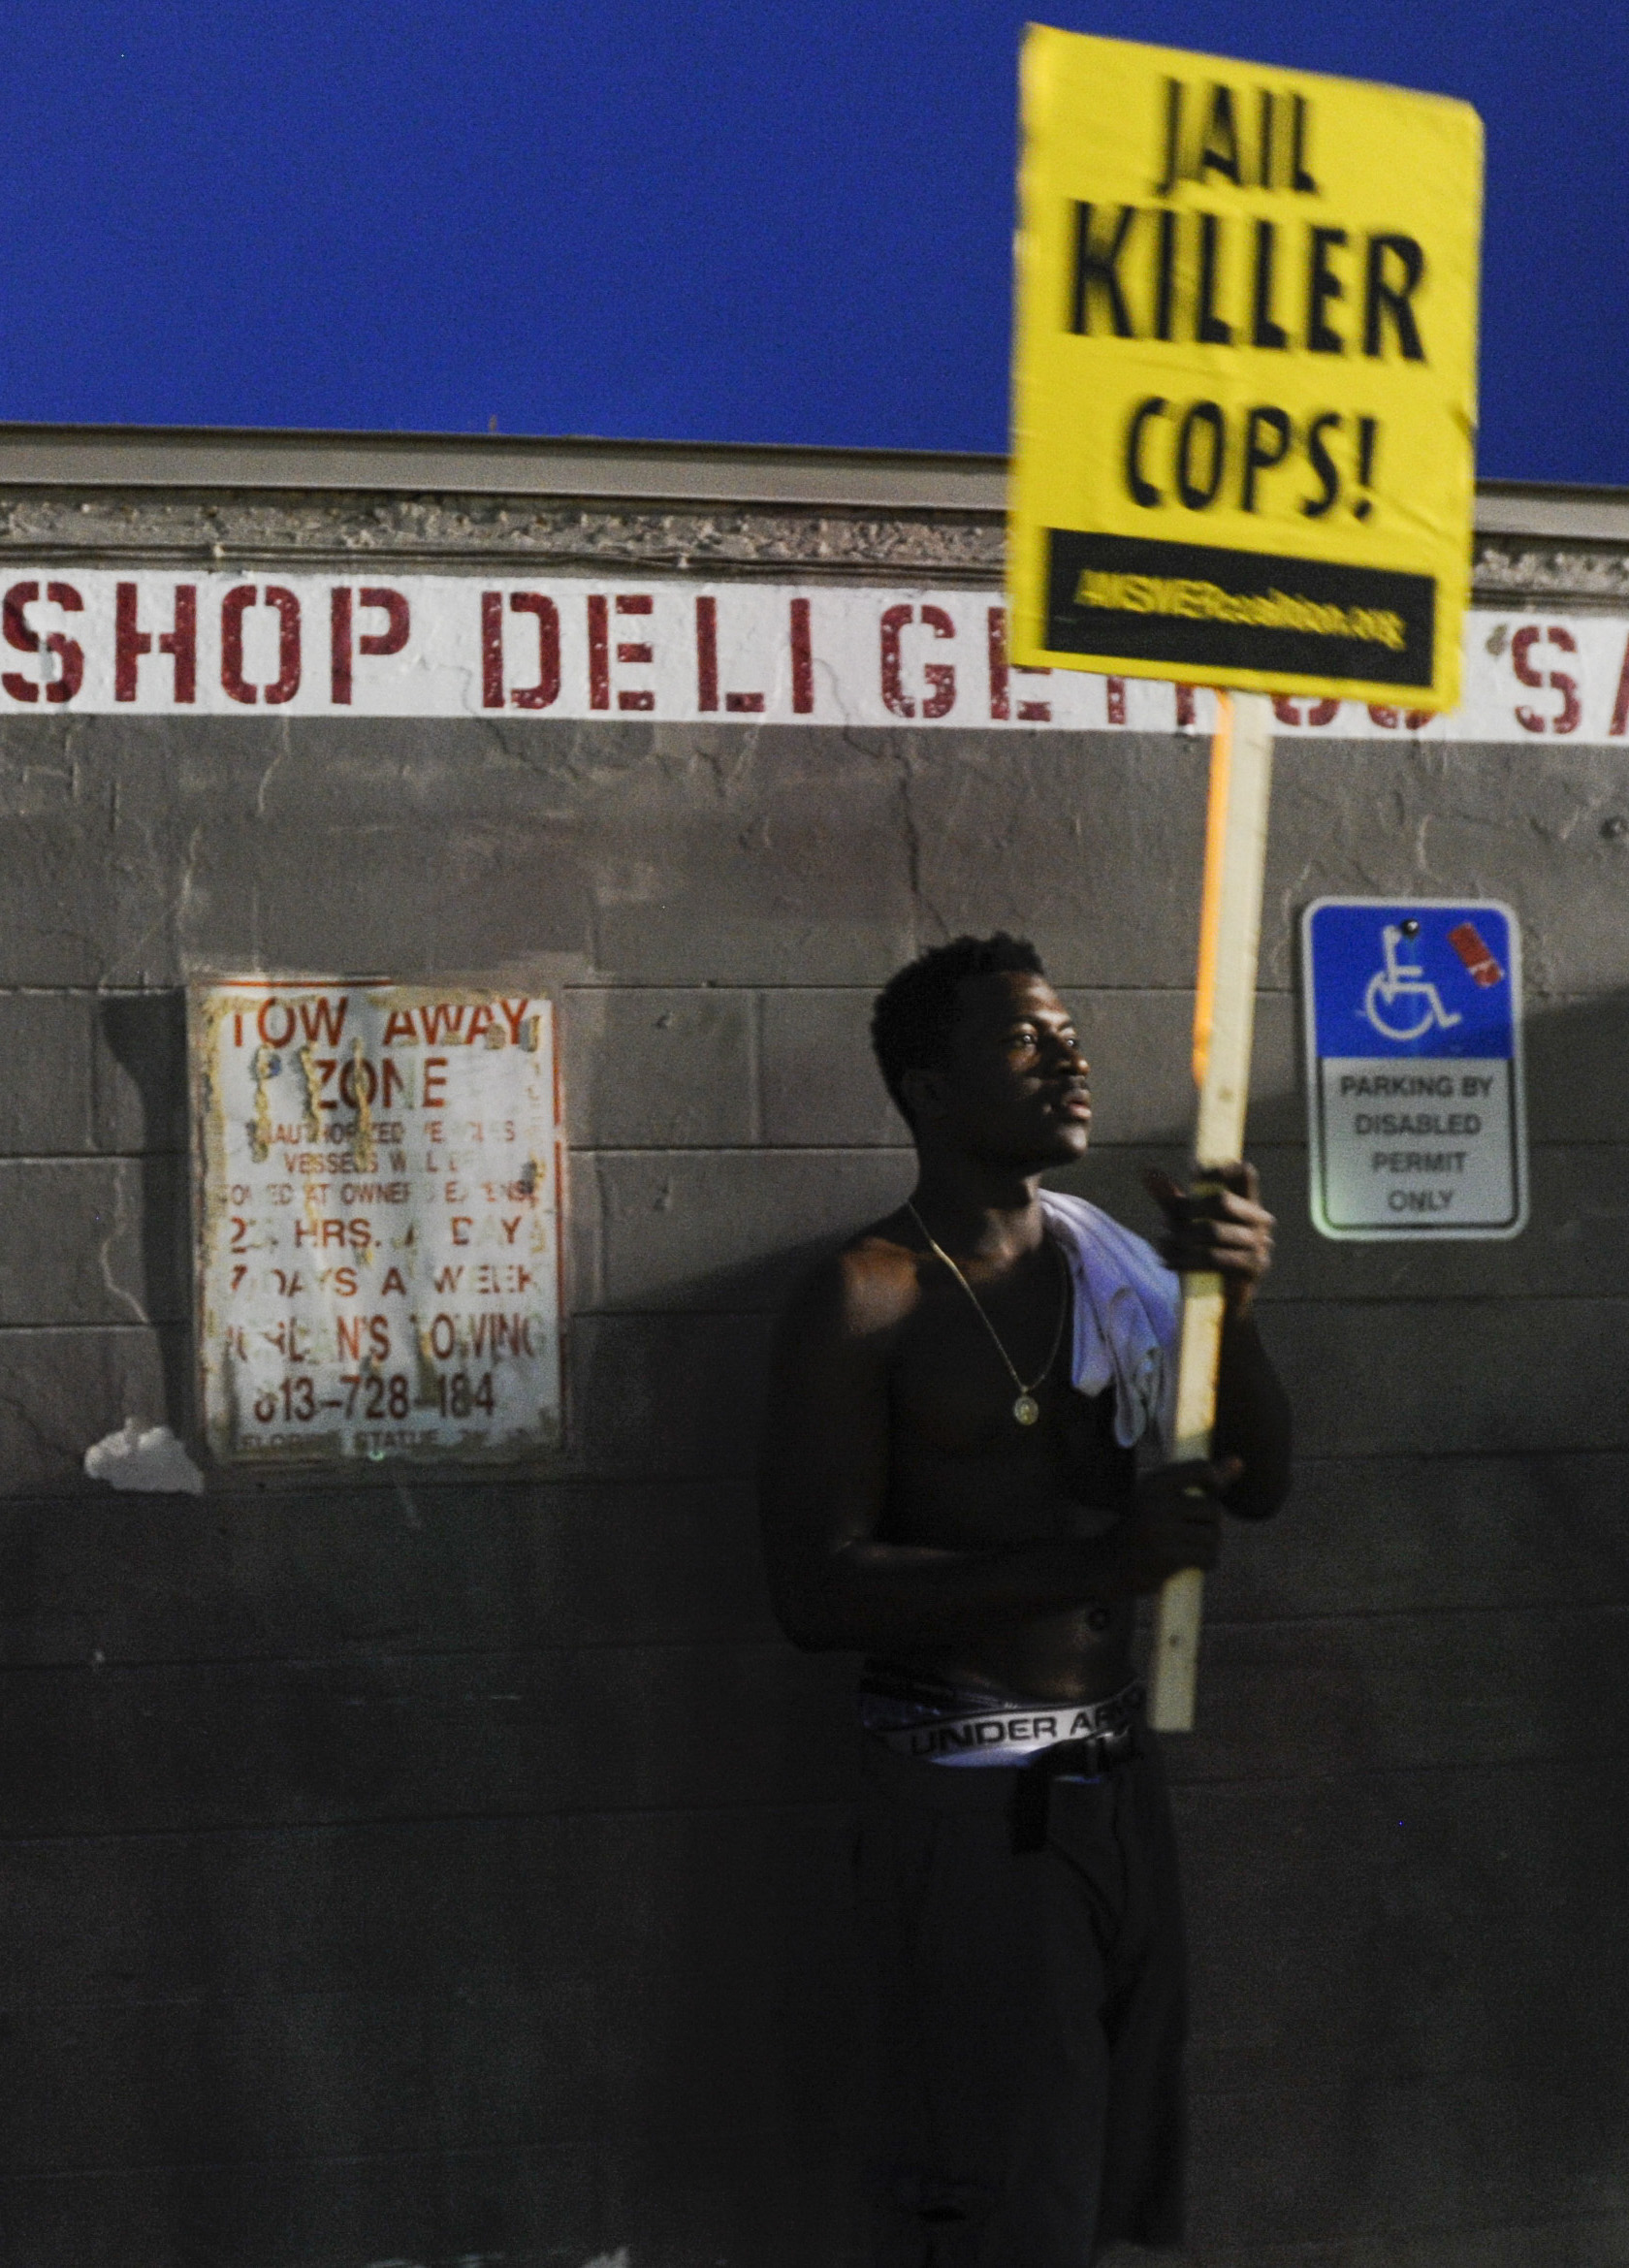  Trey Rumlin, an 18-year-old Tampa resident, stands nearby the Get N Go convenience store where friend Levonia Riggins worked during a gathering on South 78th Street in Tampa, FL. "Daddyman was like a bro to me," Rumlin said, referencing Riggins' nic